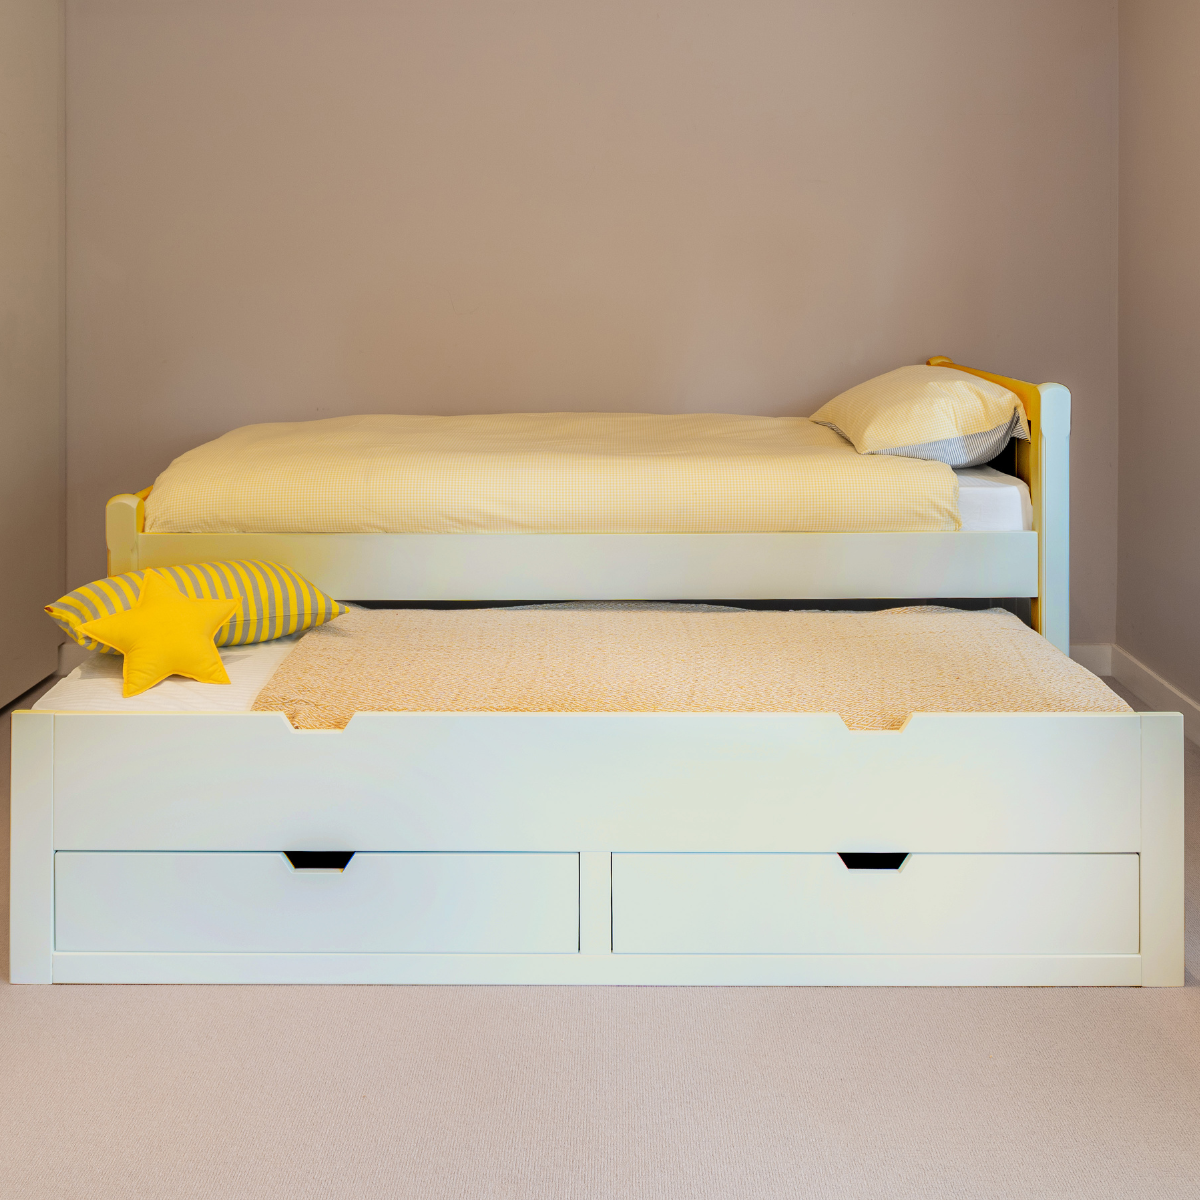 Charterhouse Children's Sleepover Bed With Drawers - Antique White